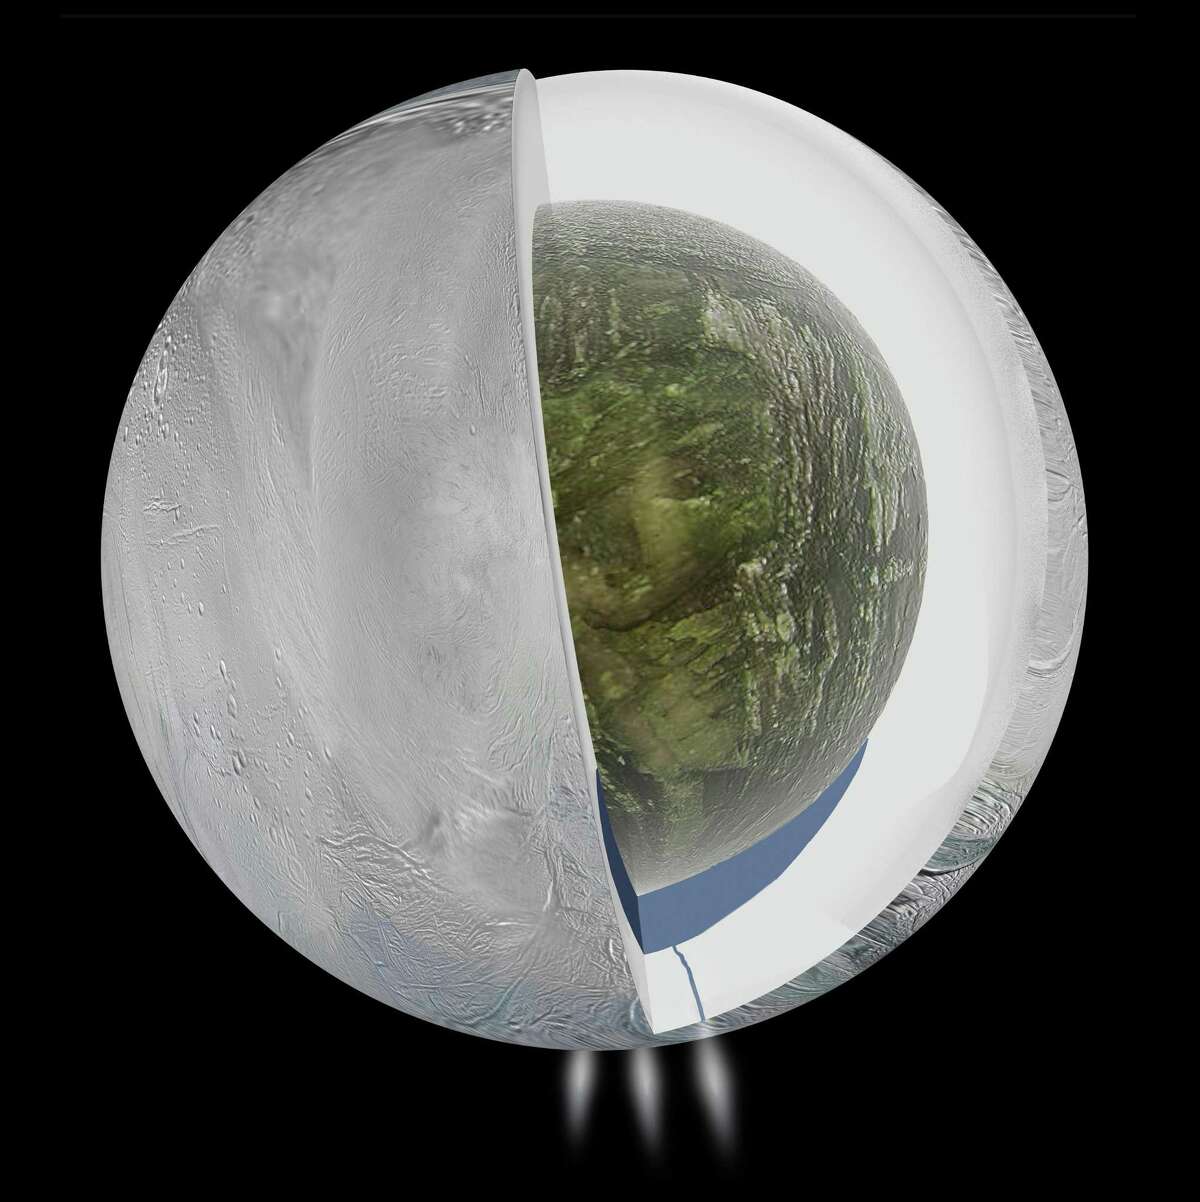 This illustration provided by NASA and based on measurements from the Cassini spacecraft shows the possible interior of Saturn’s moon Enceladus — an icy outer shell and a low-density, rocky core with a regional water ocean sandwiched between the two at southern latitudes. Plumes of water vapor and ice, first detected in 2005, are depicted in the south polar region. Scientists have uncovered a vast ocean beneath the icy surface of the moon.